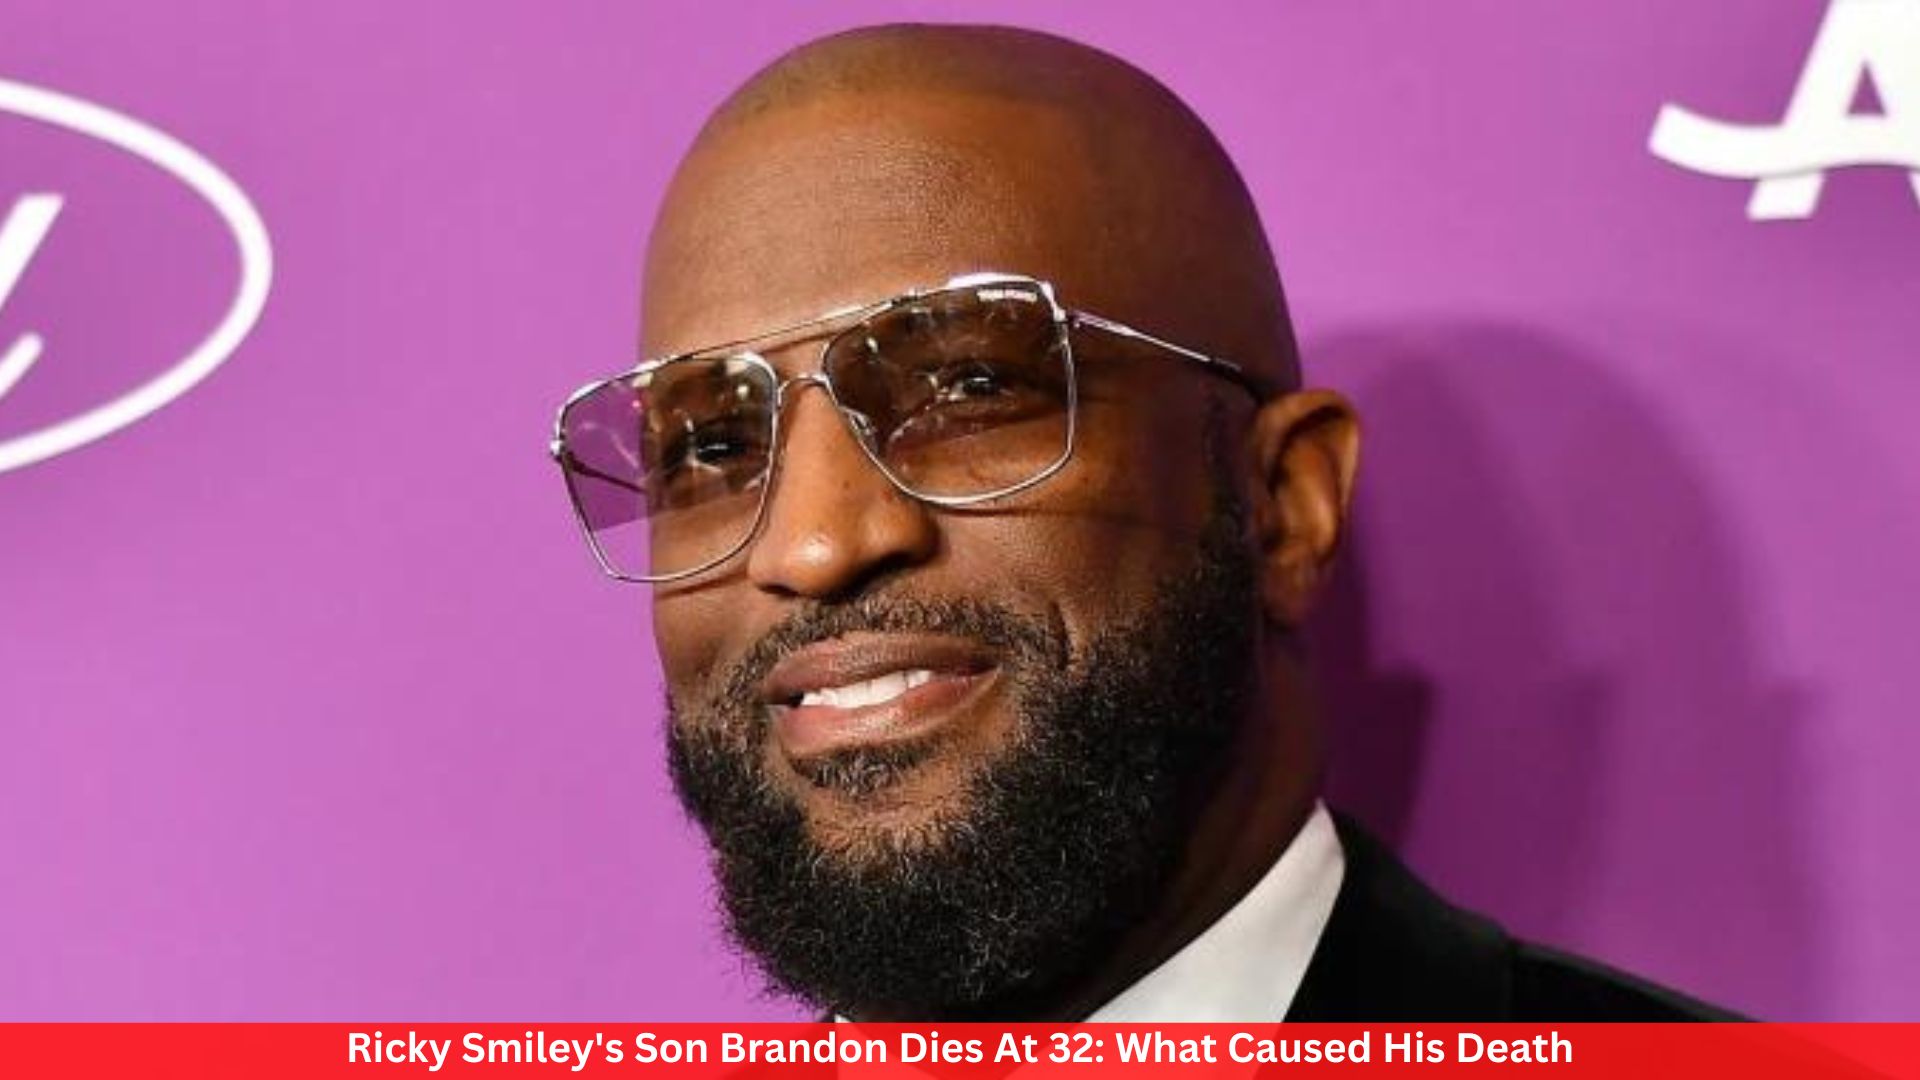 Ricky Smiley's Son Brandon Dies At 32: What Caused His Death